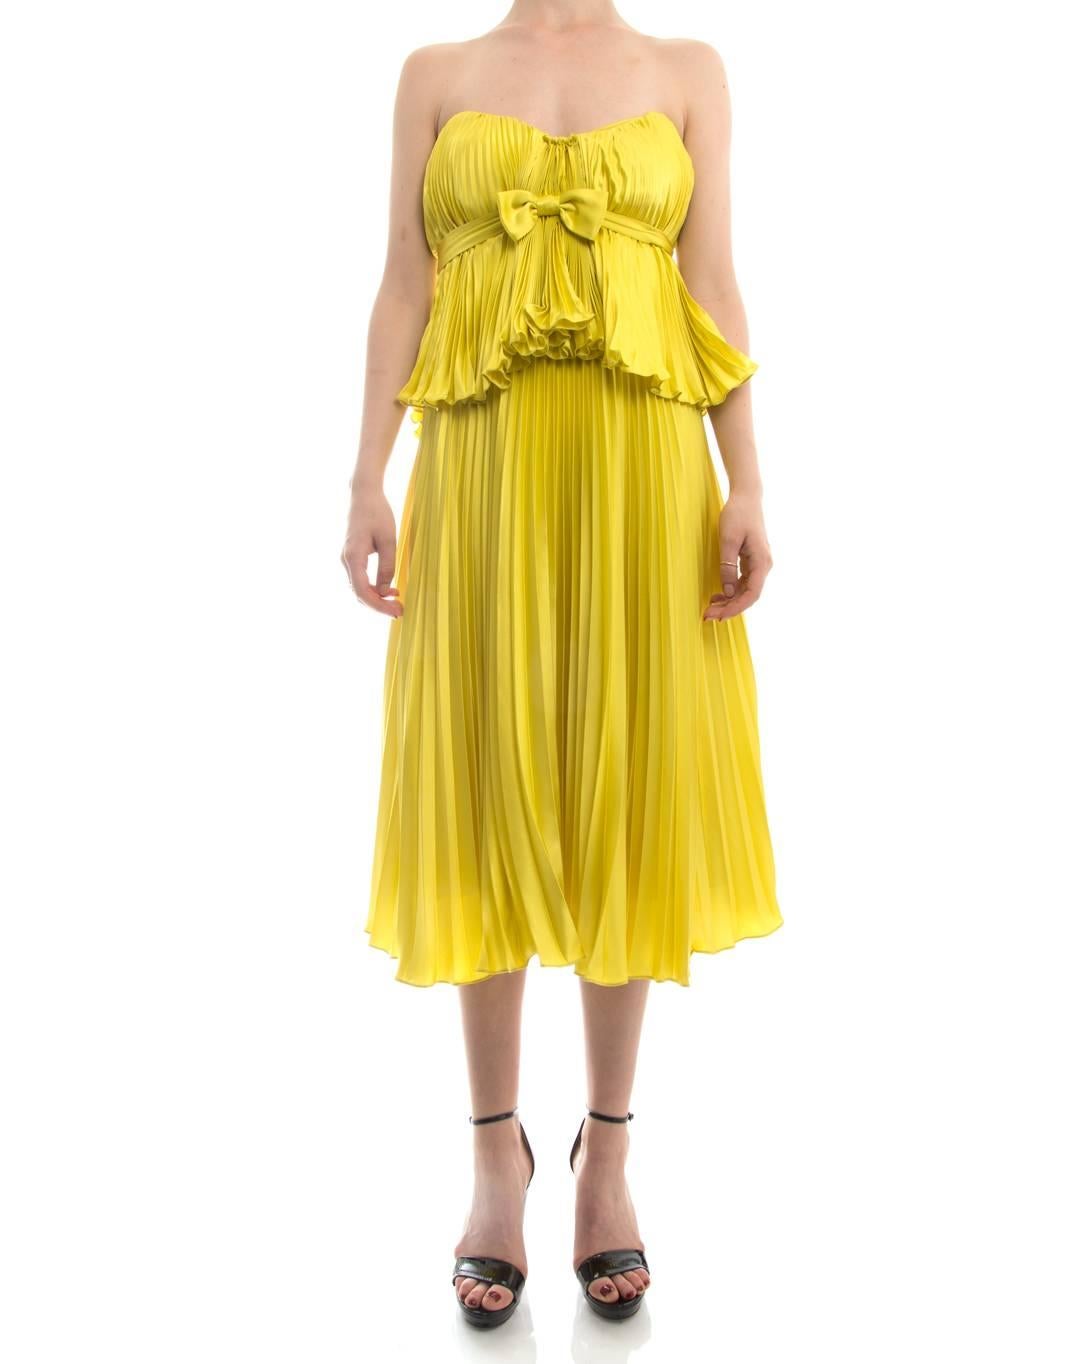 Badgley Mischka Couture Chartreuse Yellow Strapless Pleated Dress. Corset-like inset throughout bust with boning and separate zipper. Centre back invisible zipper. Marked size USA 4. To fit 33” maximum bust, 27” waist, semi-full hip recommended for